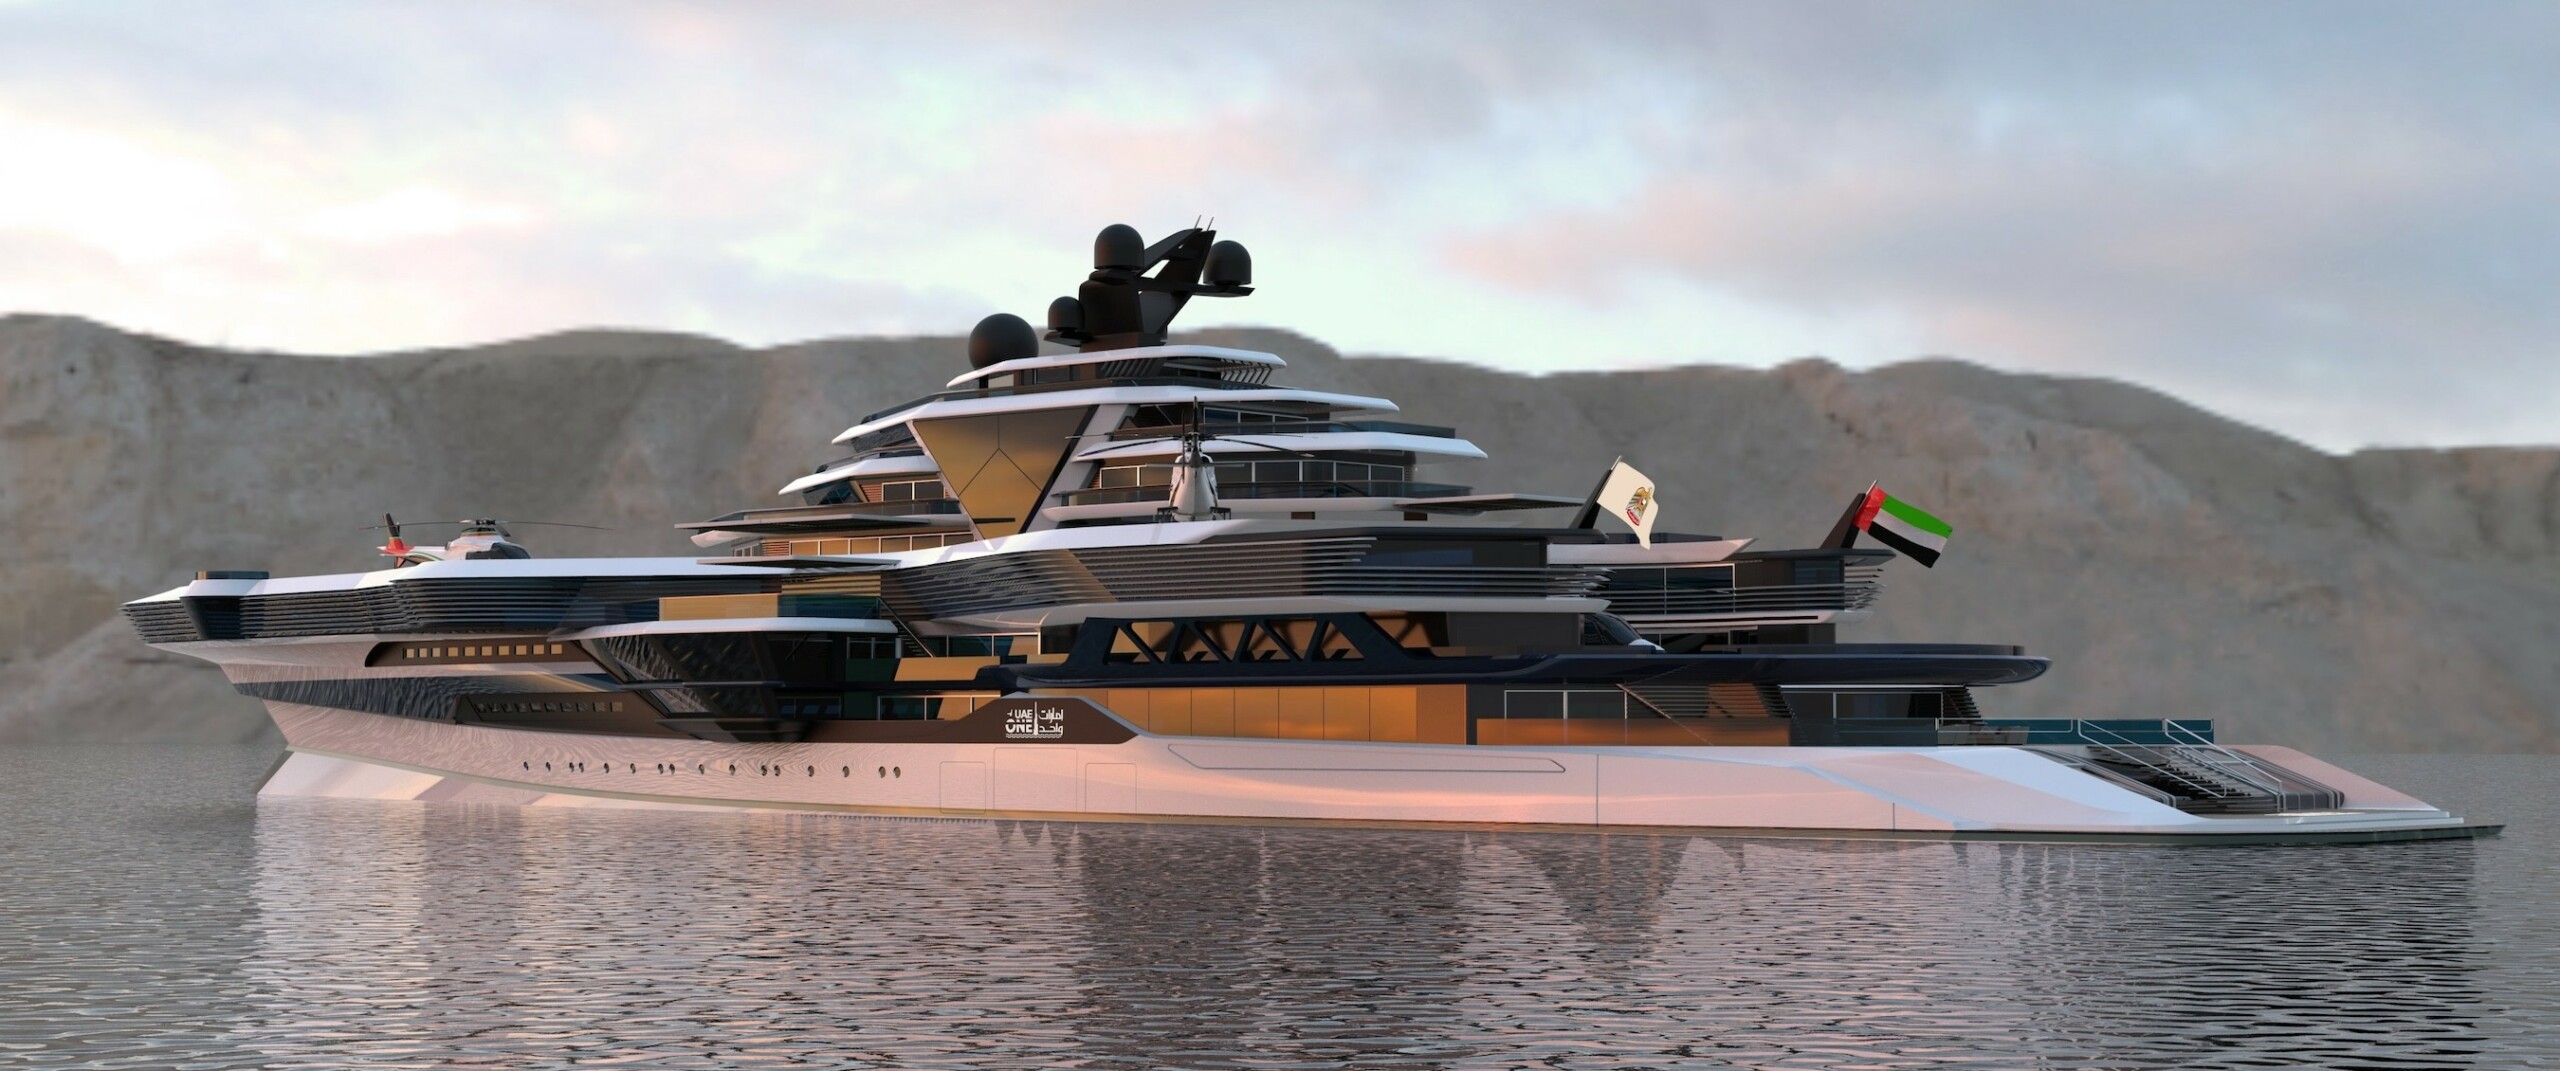 us aircraft carrier inspired uae one megayacht is so big it could be its own country 4 scaled